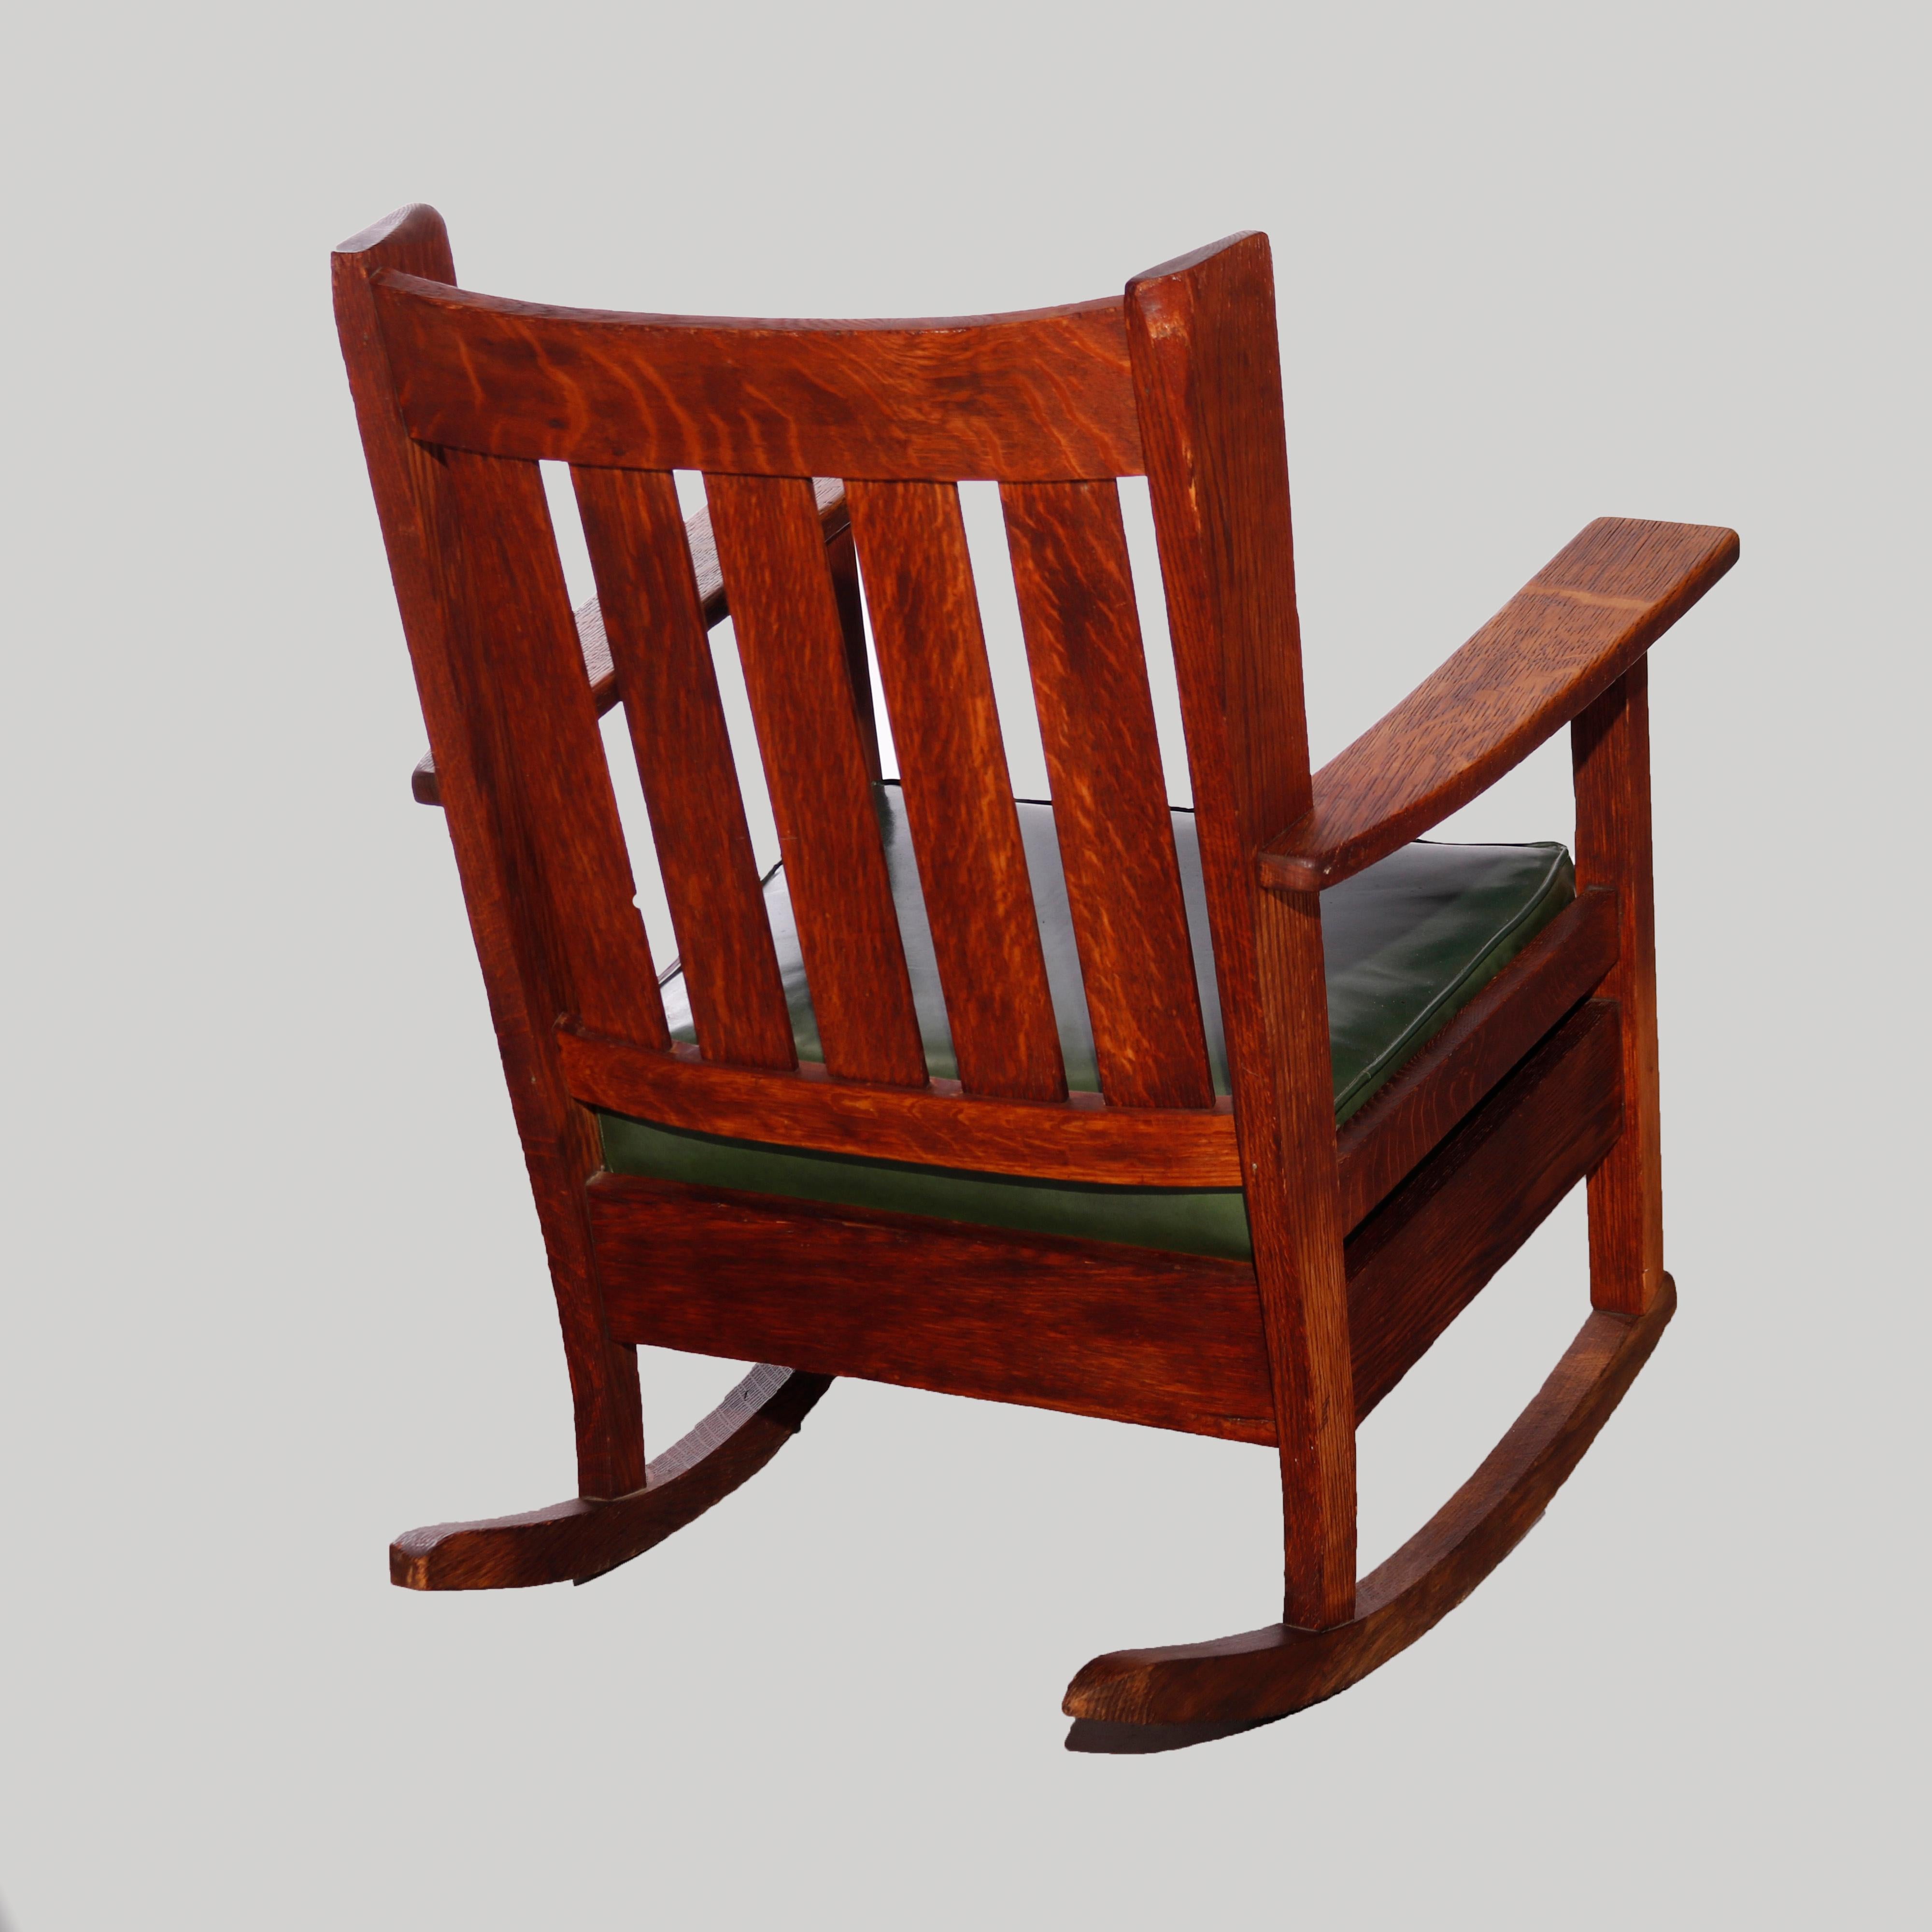 20th Century Antique Arts & Crafts Stickley Brothers Mission Oak Wing Chair & Rocker, 1910